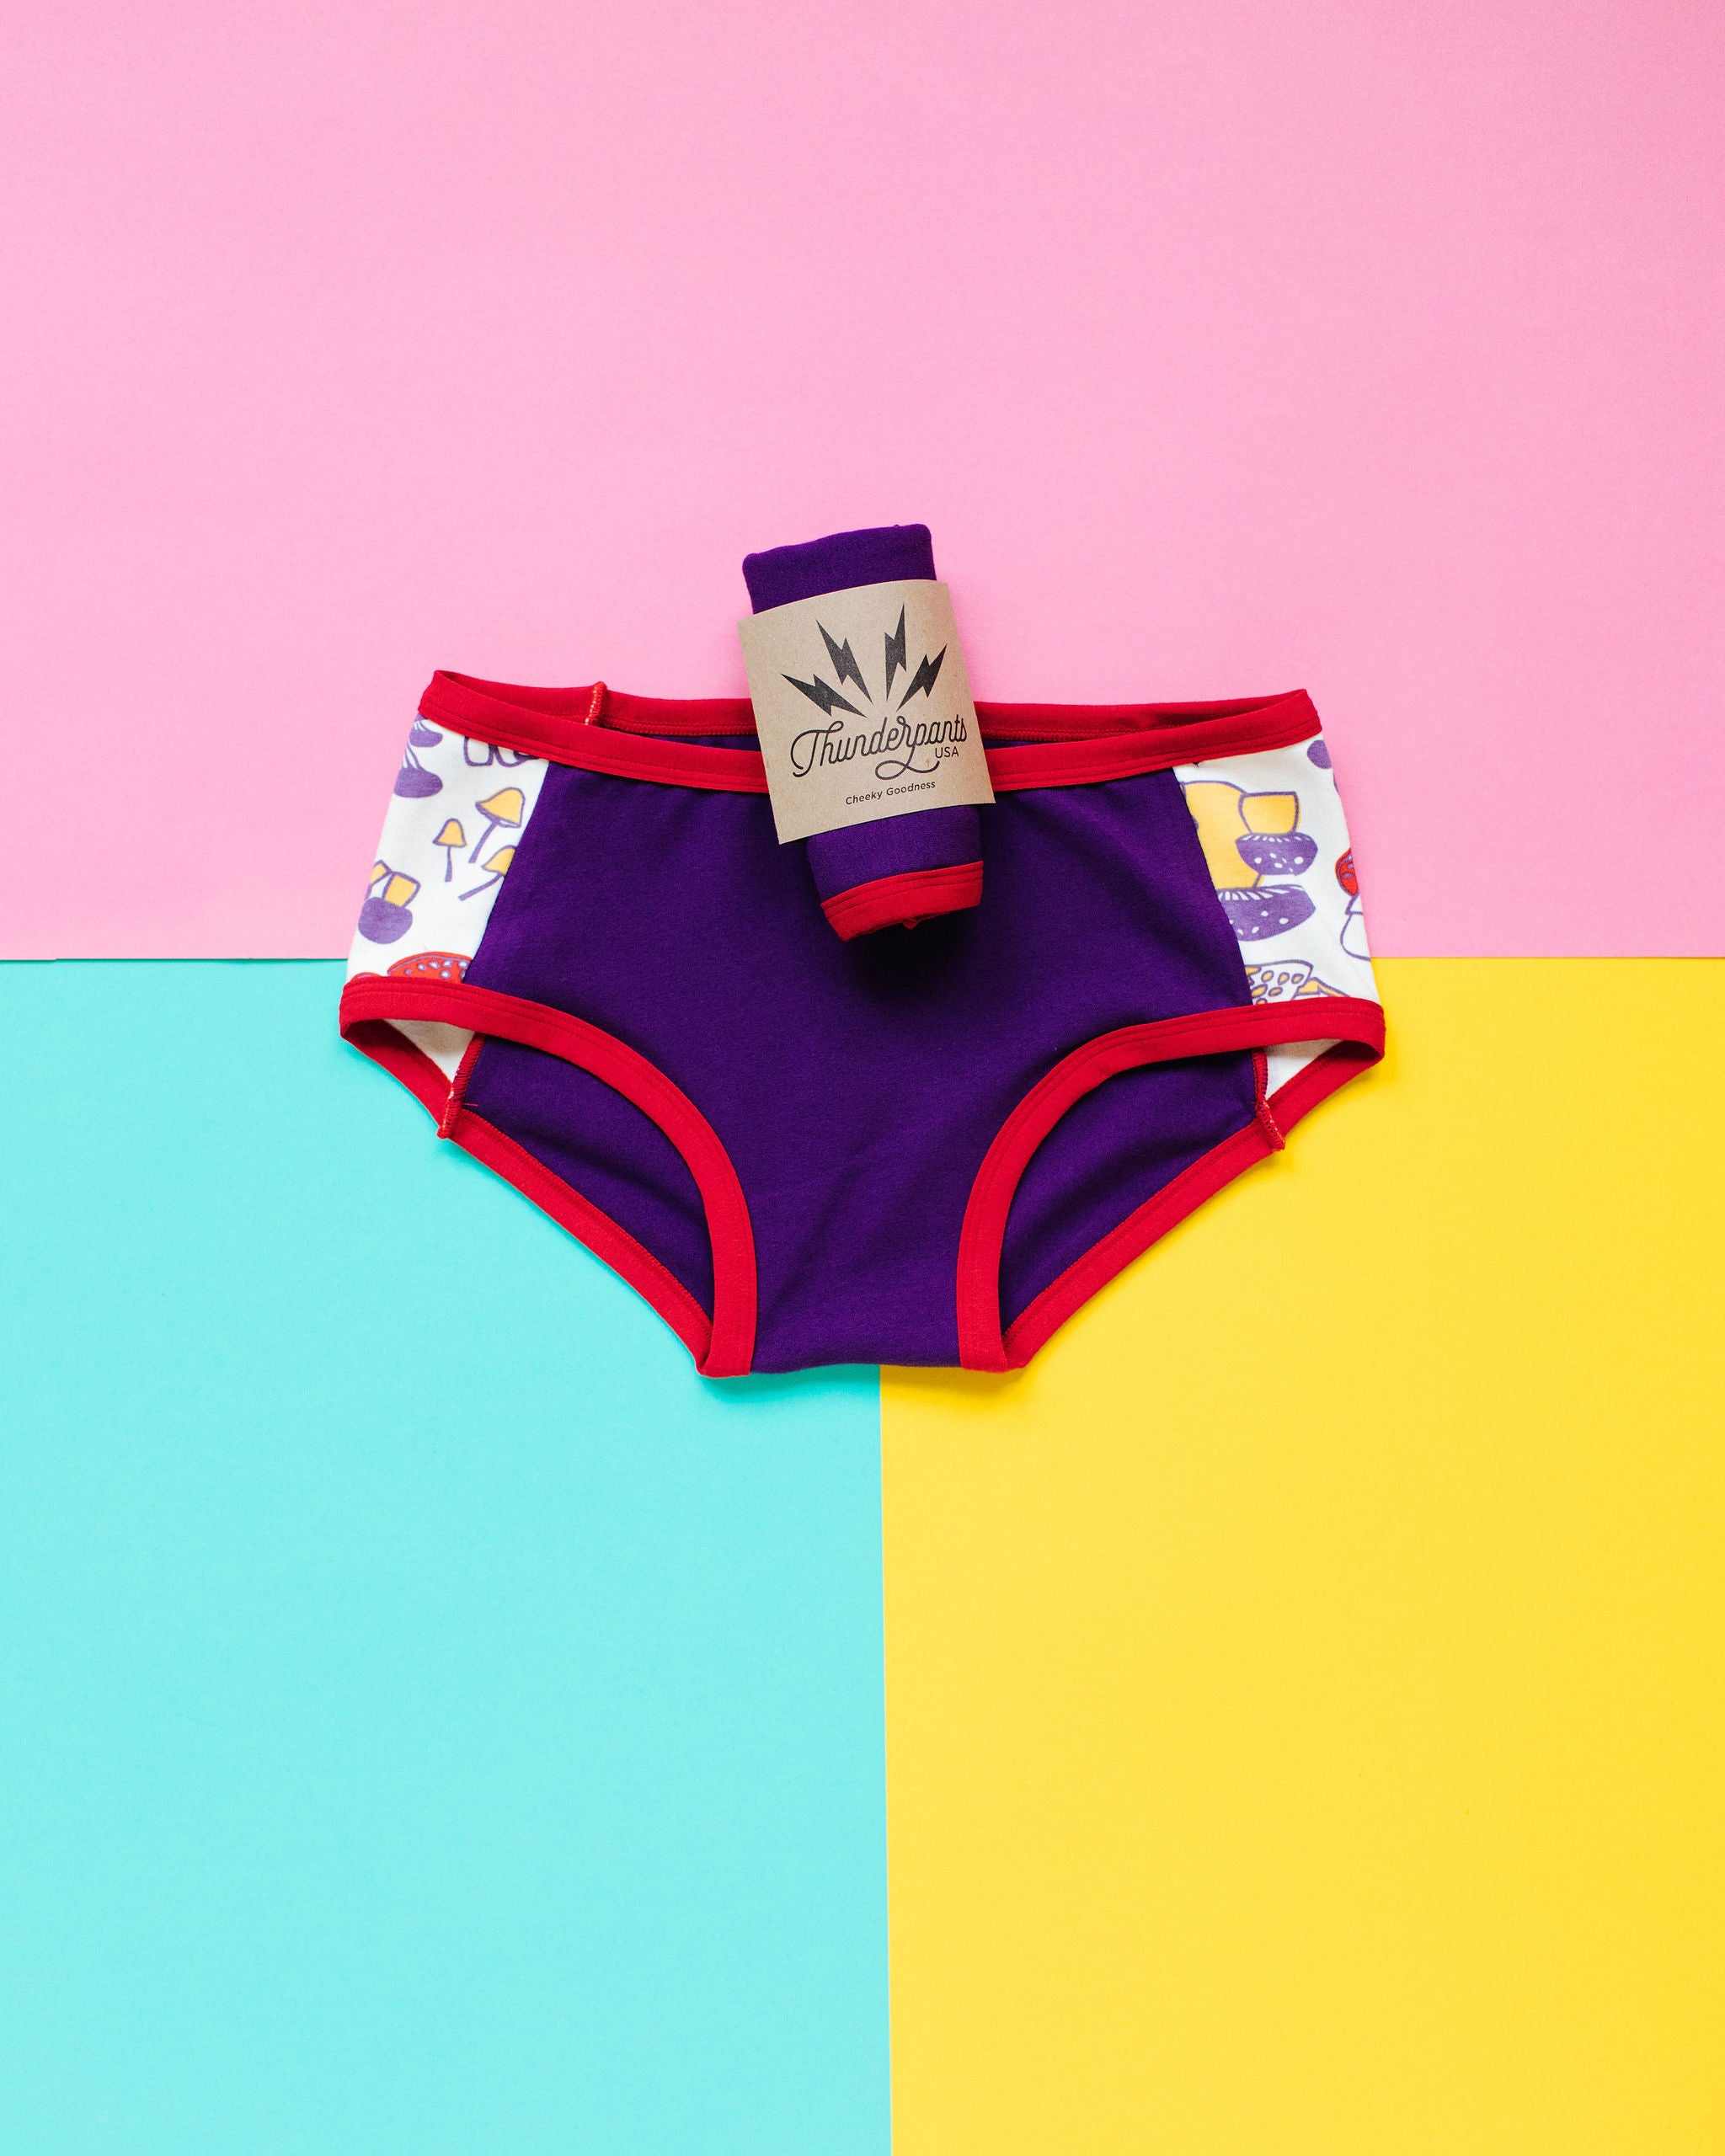 Flat lay of Thunderpants Hipster Panel Pants style underwear in Mushroom Magic - mushroom sides, purple middle, and red binding.